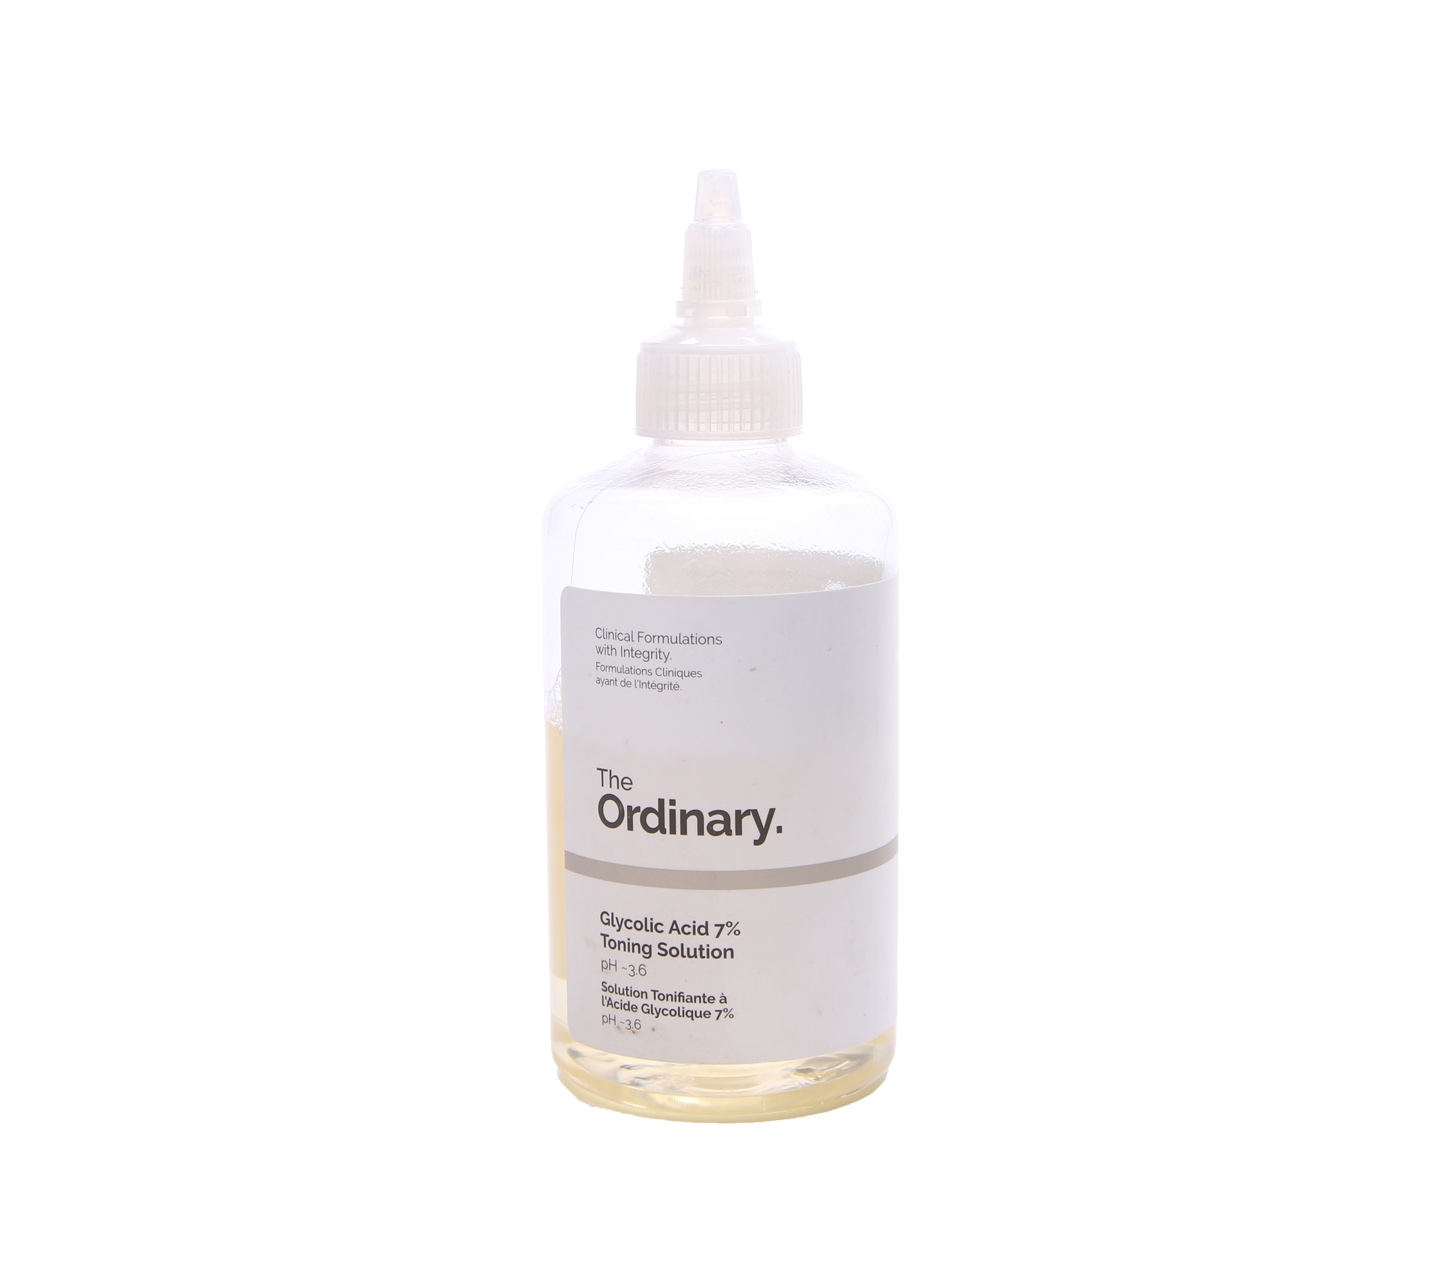 The Ordinary Glycolic Acid 7% Toning Solution Skin Care